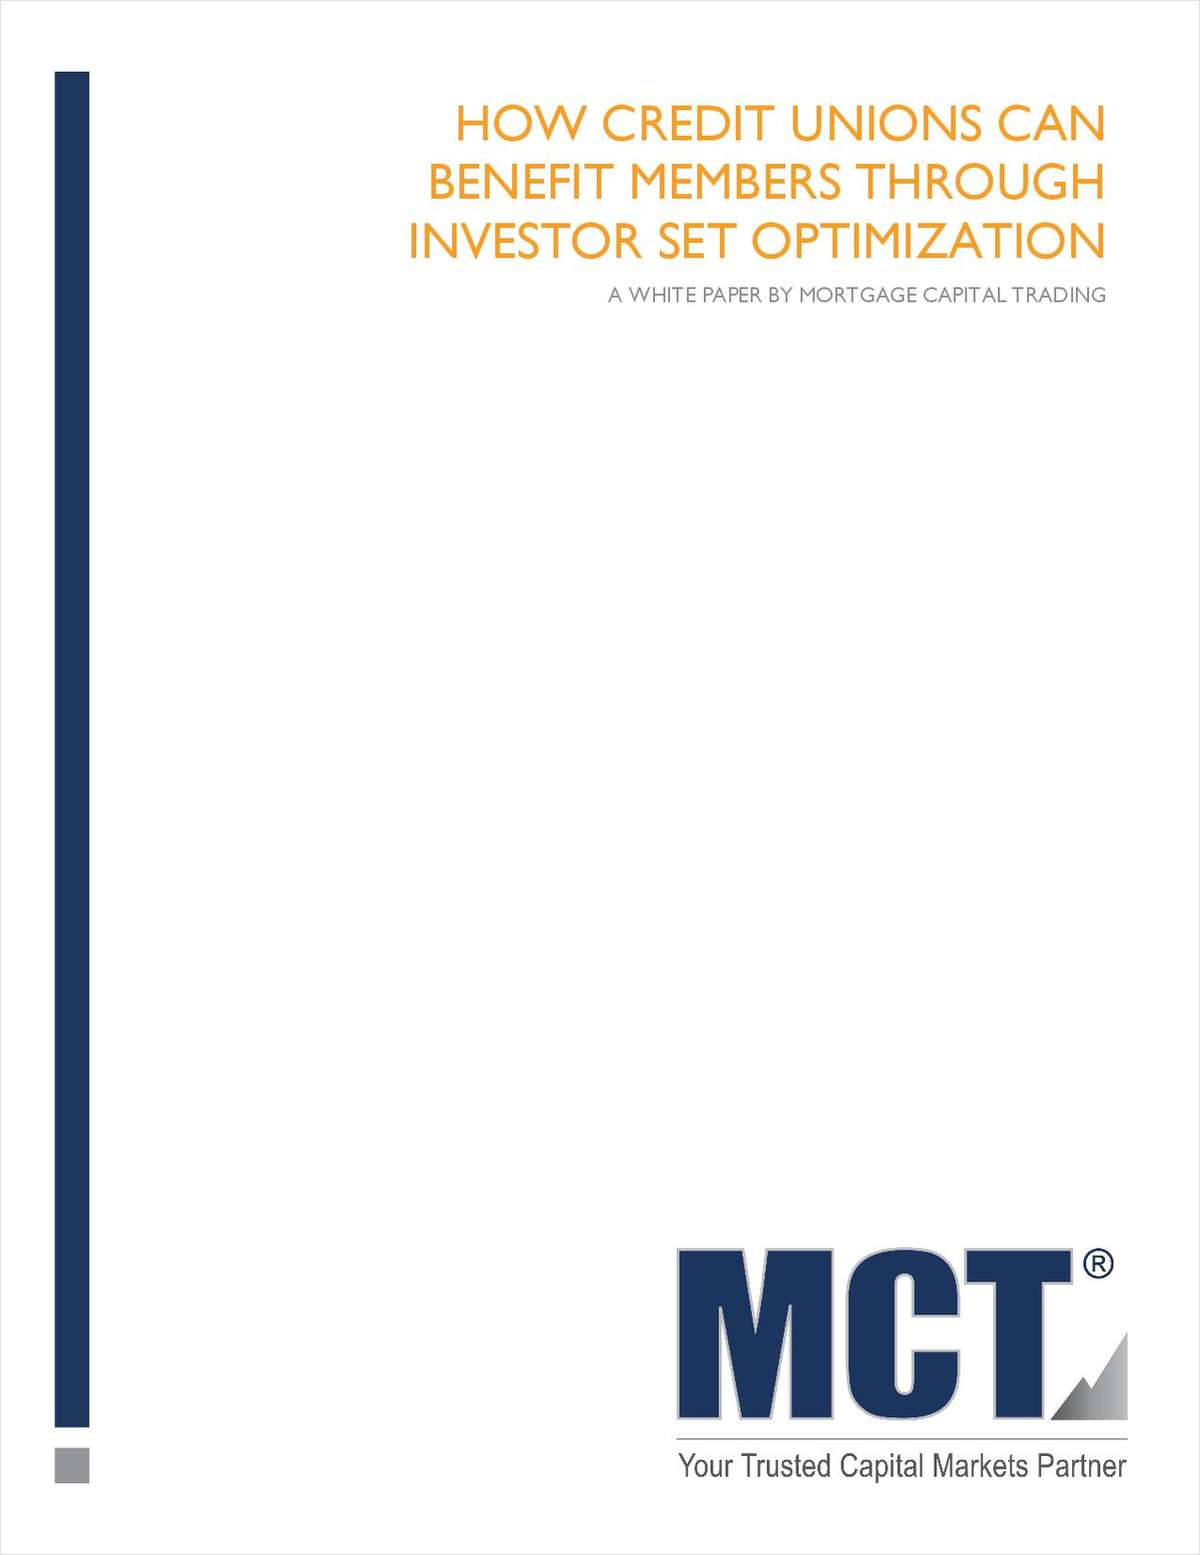 How Credit Unions Can Benefit Members Through Investor Set Optimization